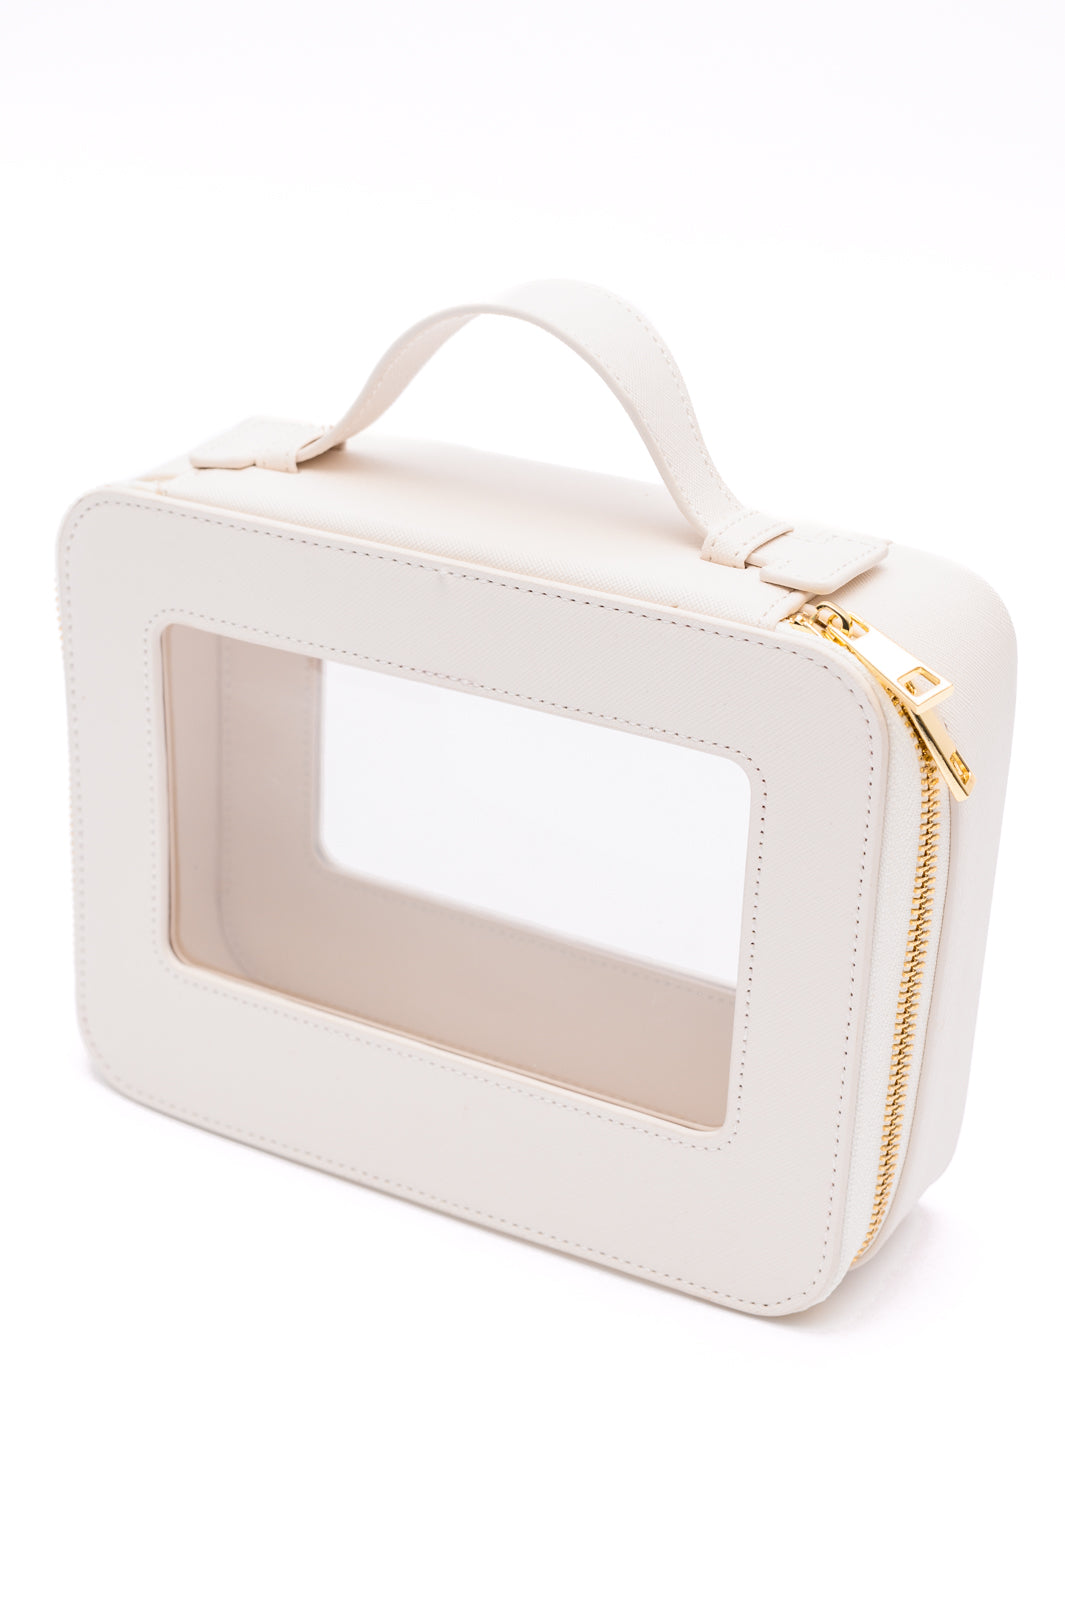 PU Leather Travel Cosmetic Case in Cream-Womens-OS-mercuryfoodservice Shop for Women & Kids